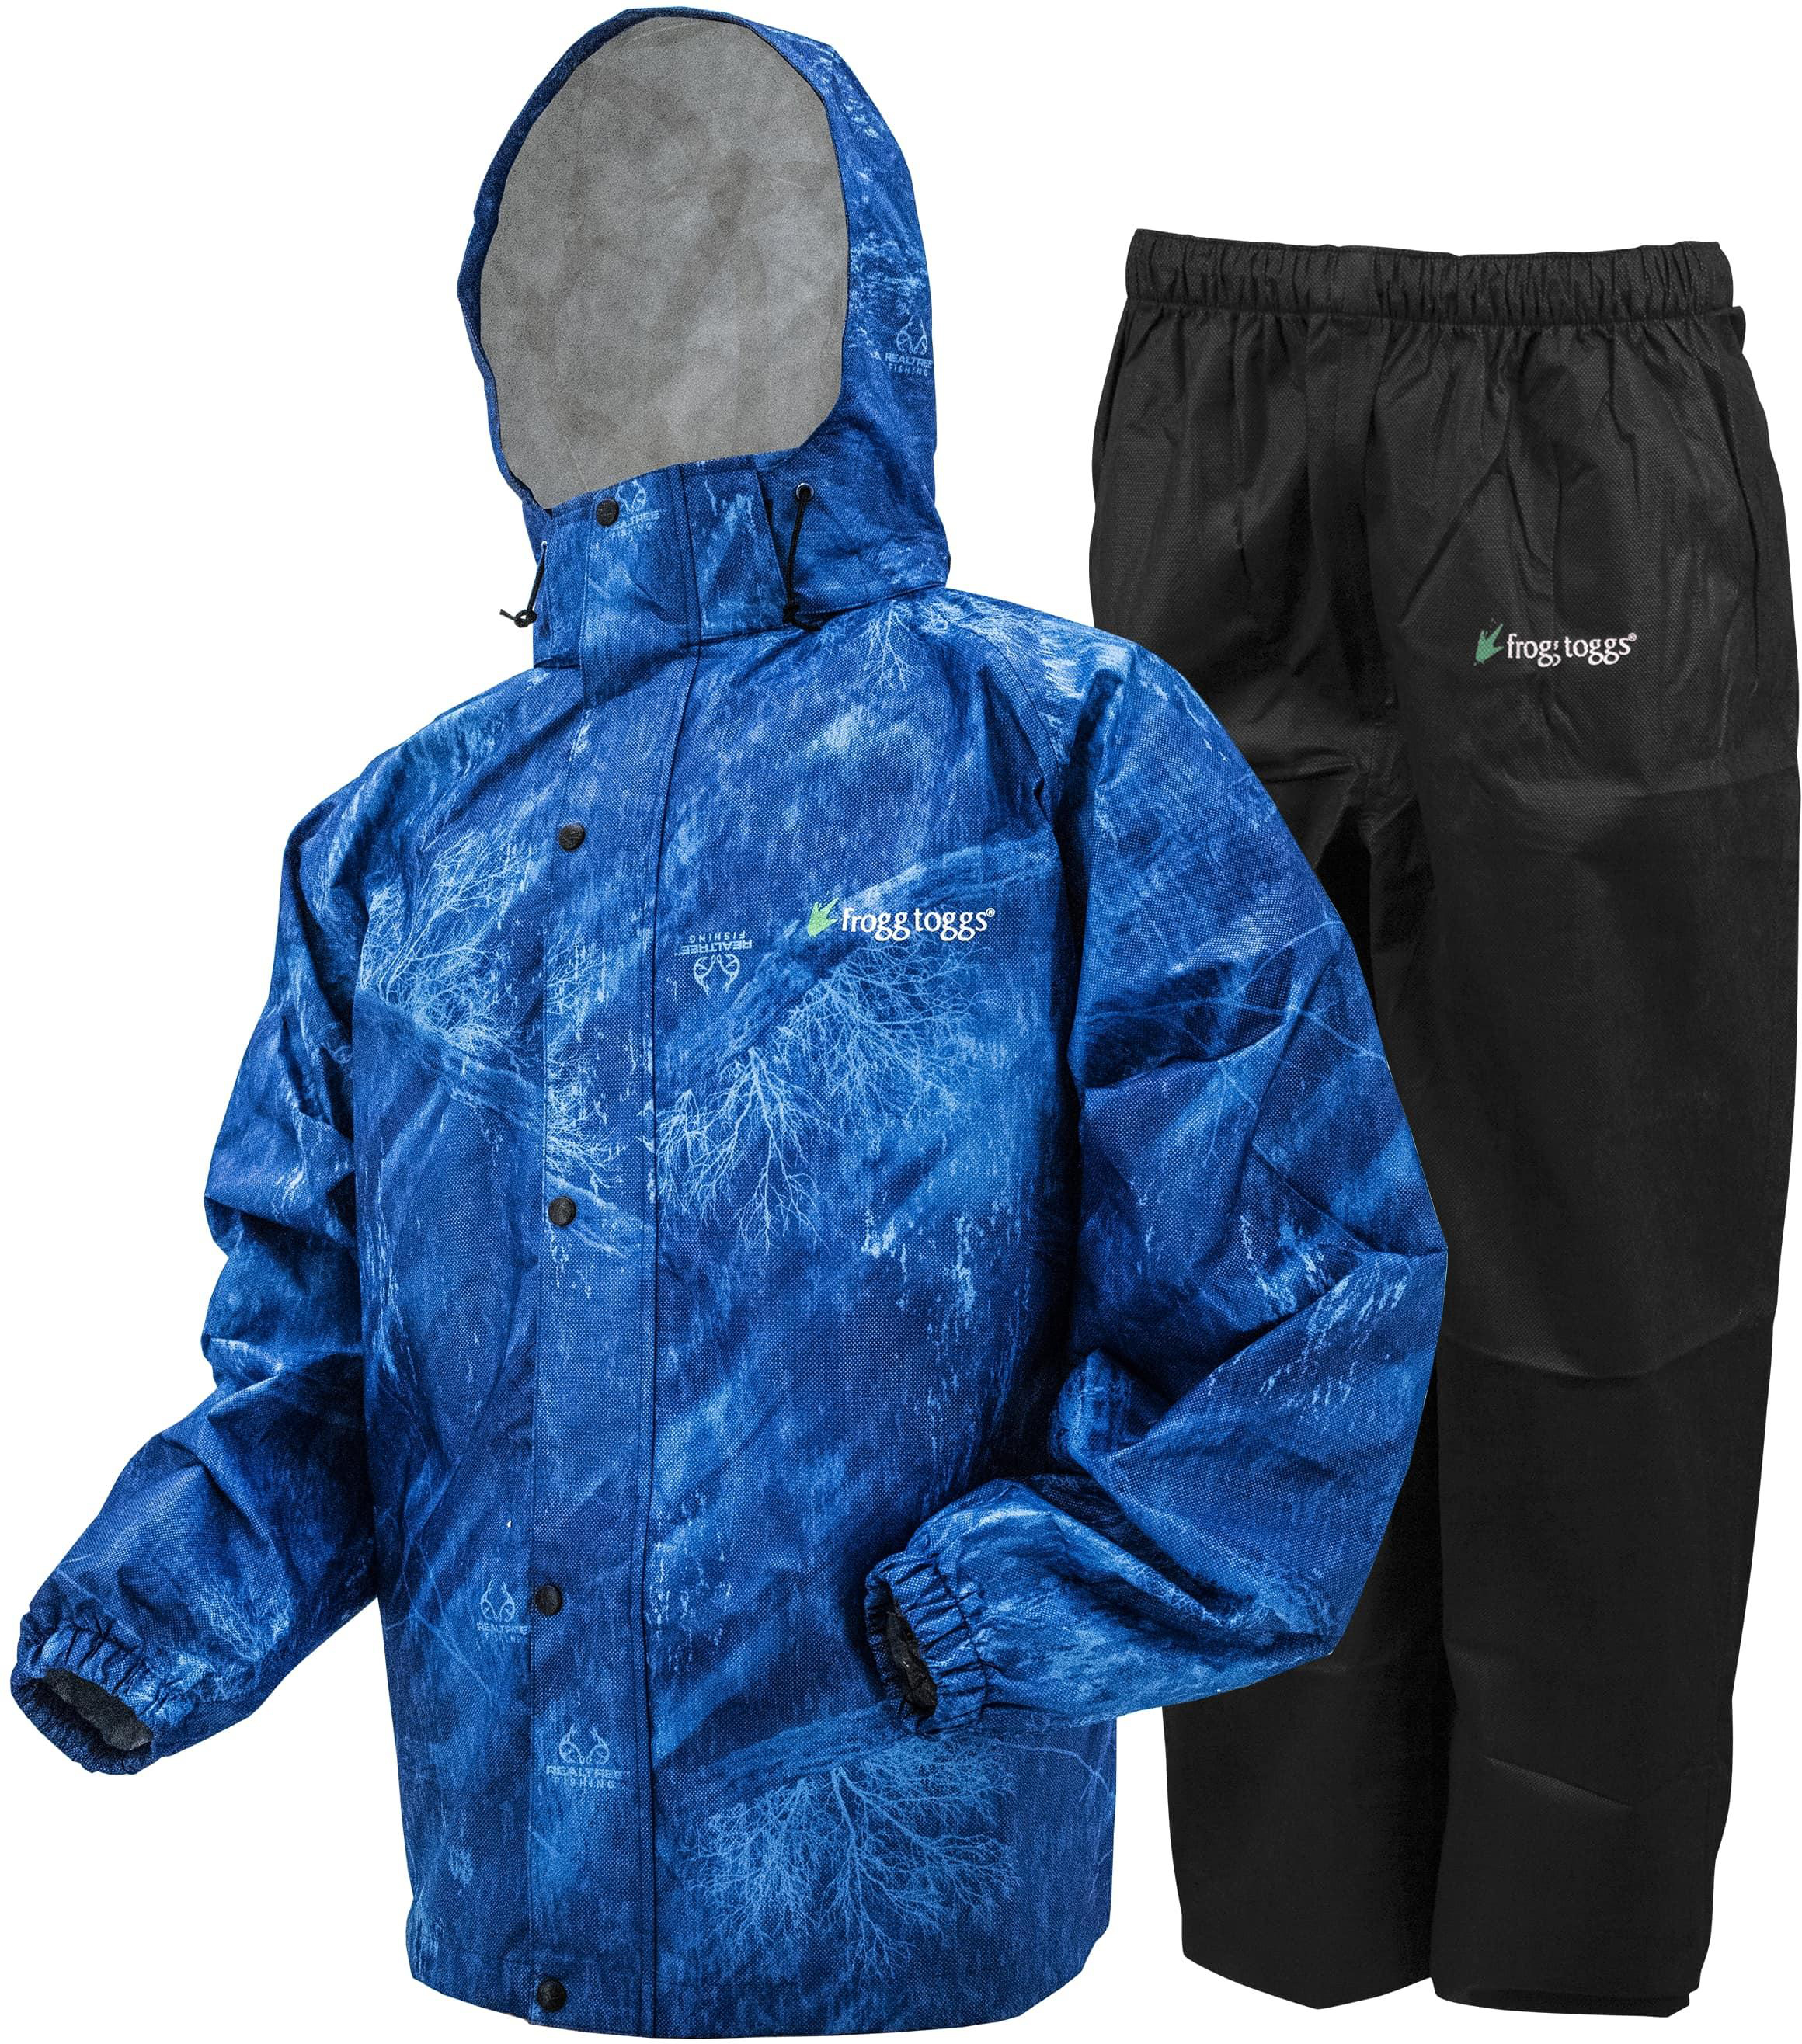 https://op2.0ps.us/original/opplanet-frogg-toggs-all-sport-rain-suit-mens-realtree-fishing-dark-blue-extra-large-as1310-163xl-main